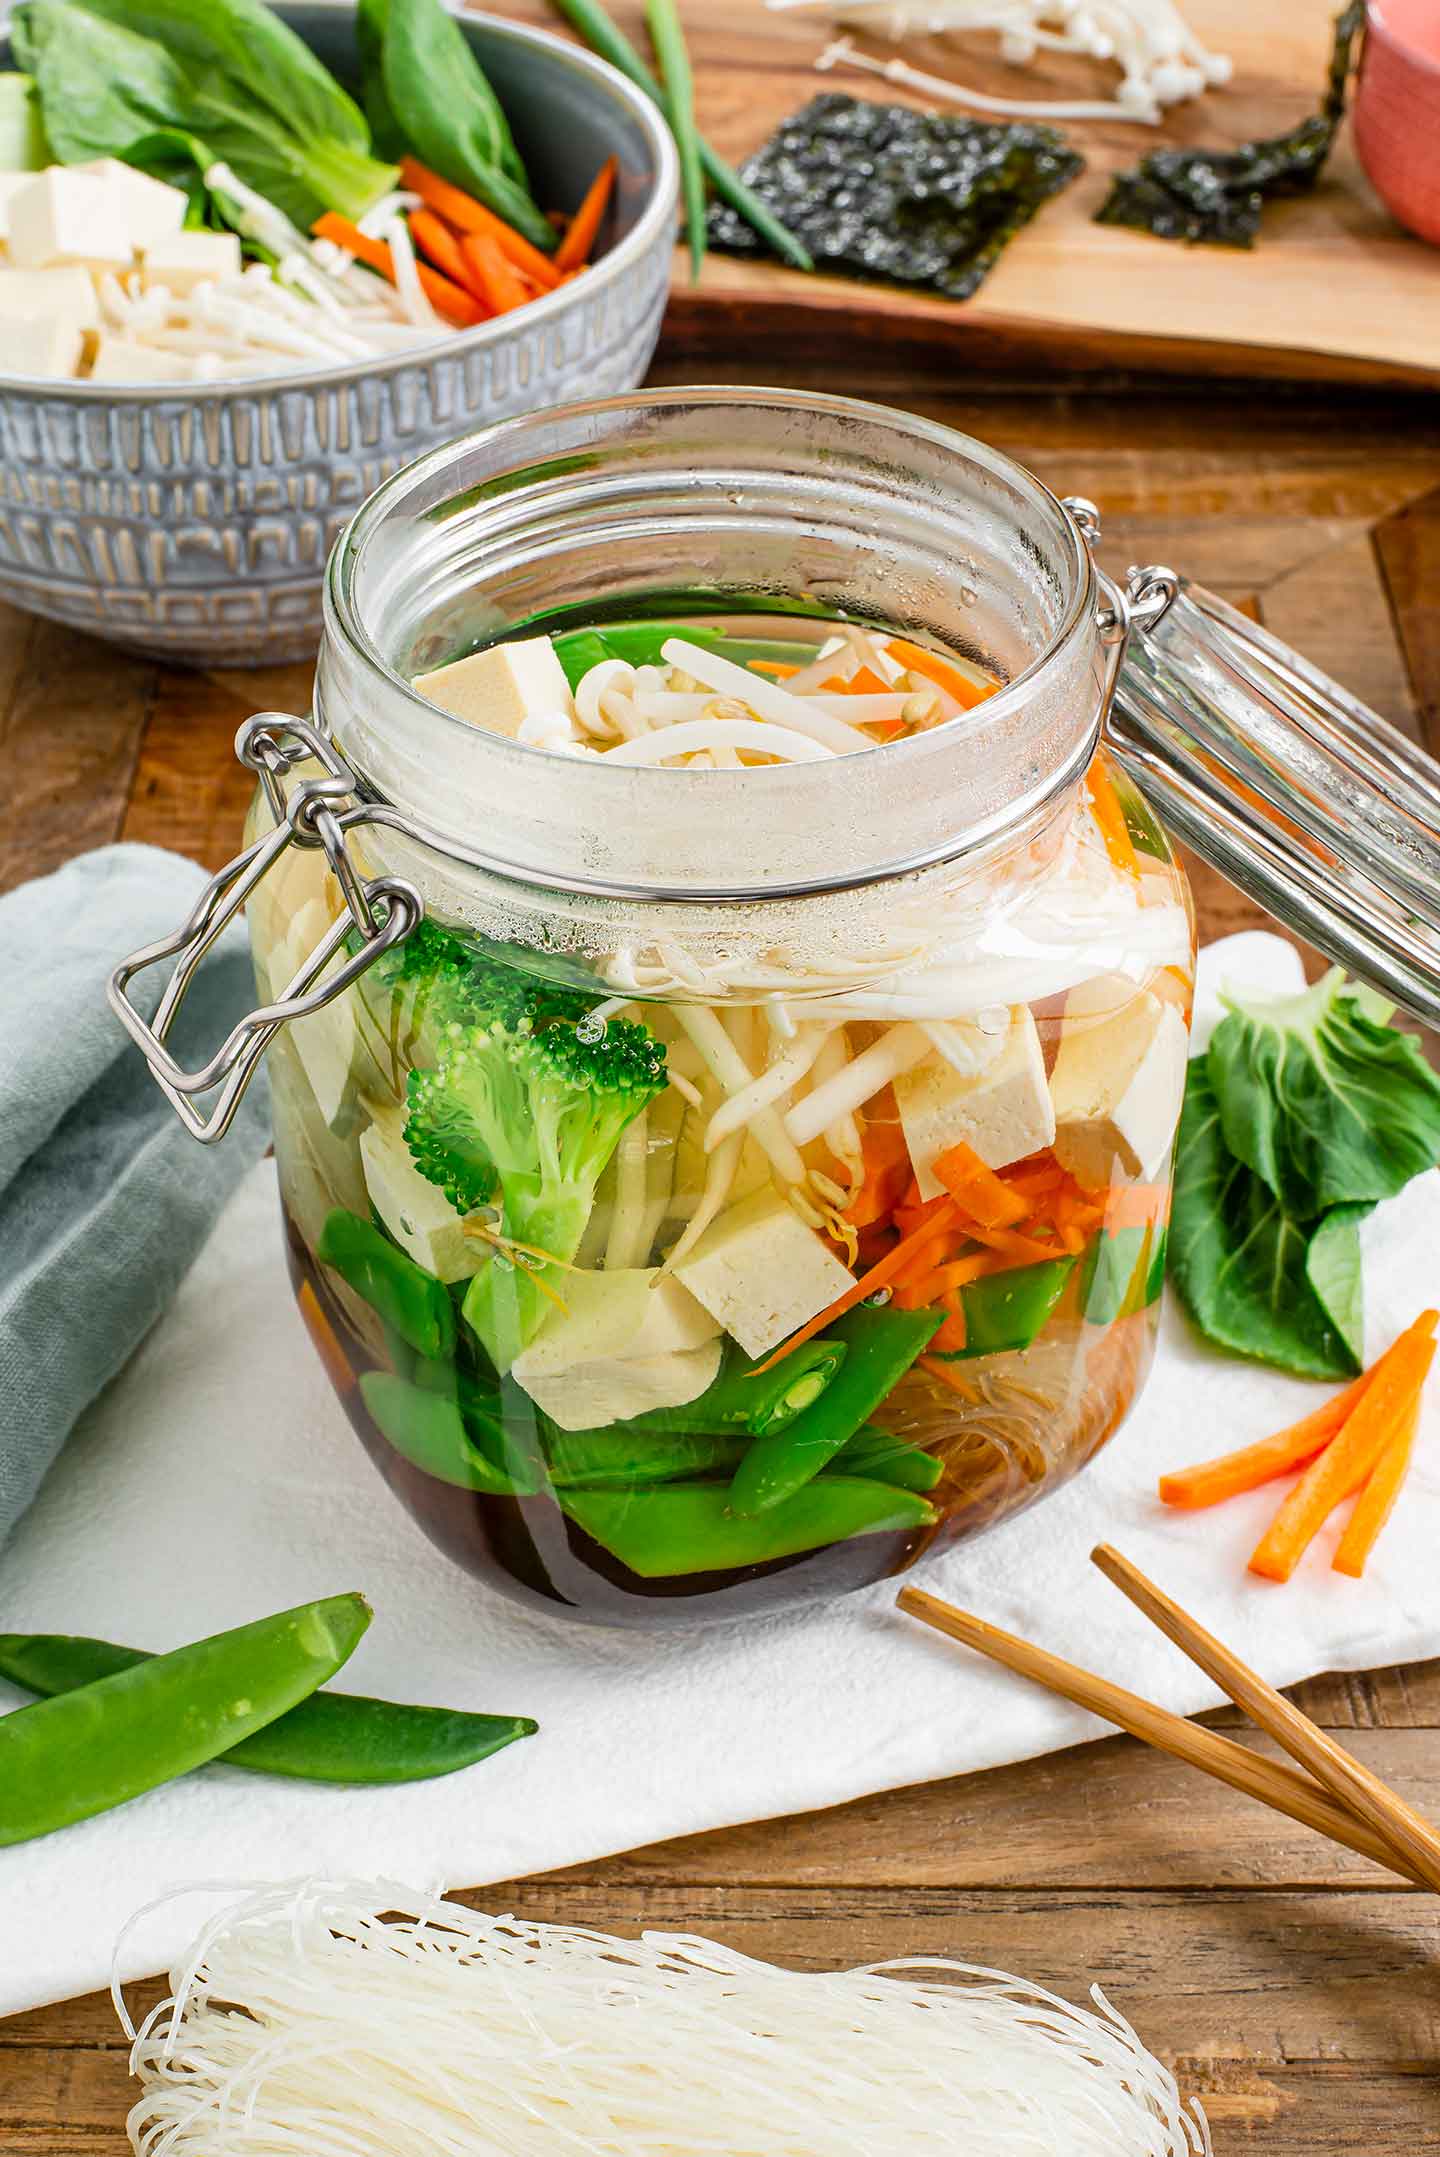 Side view of a glass jar with a clamp lid filled with vegetables, tofu, rice vermicelli noodles, and a dark broth. Chop sticks and extra ingredients surround the jar of soup.